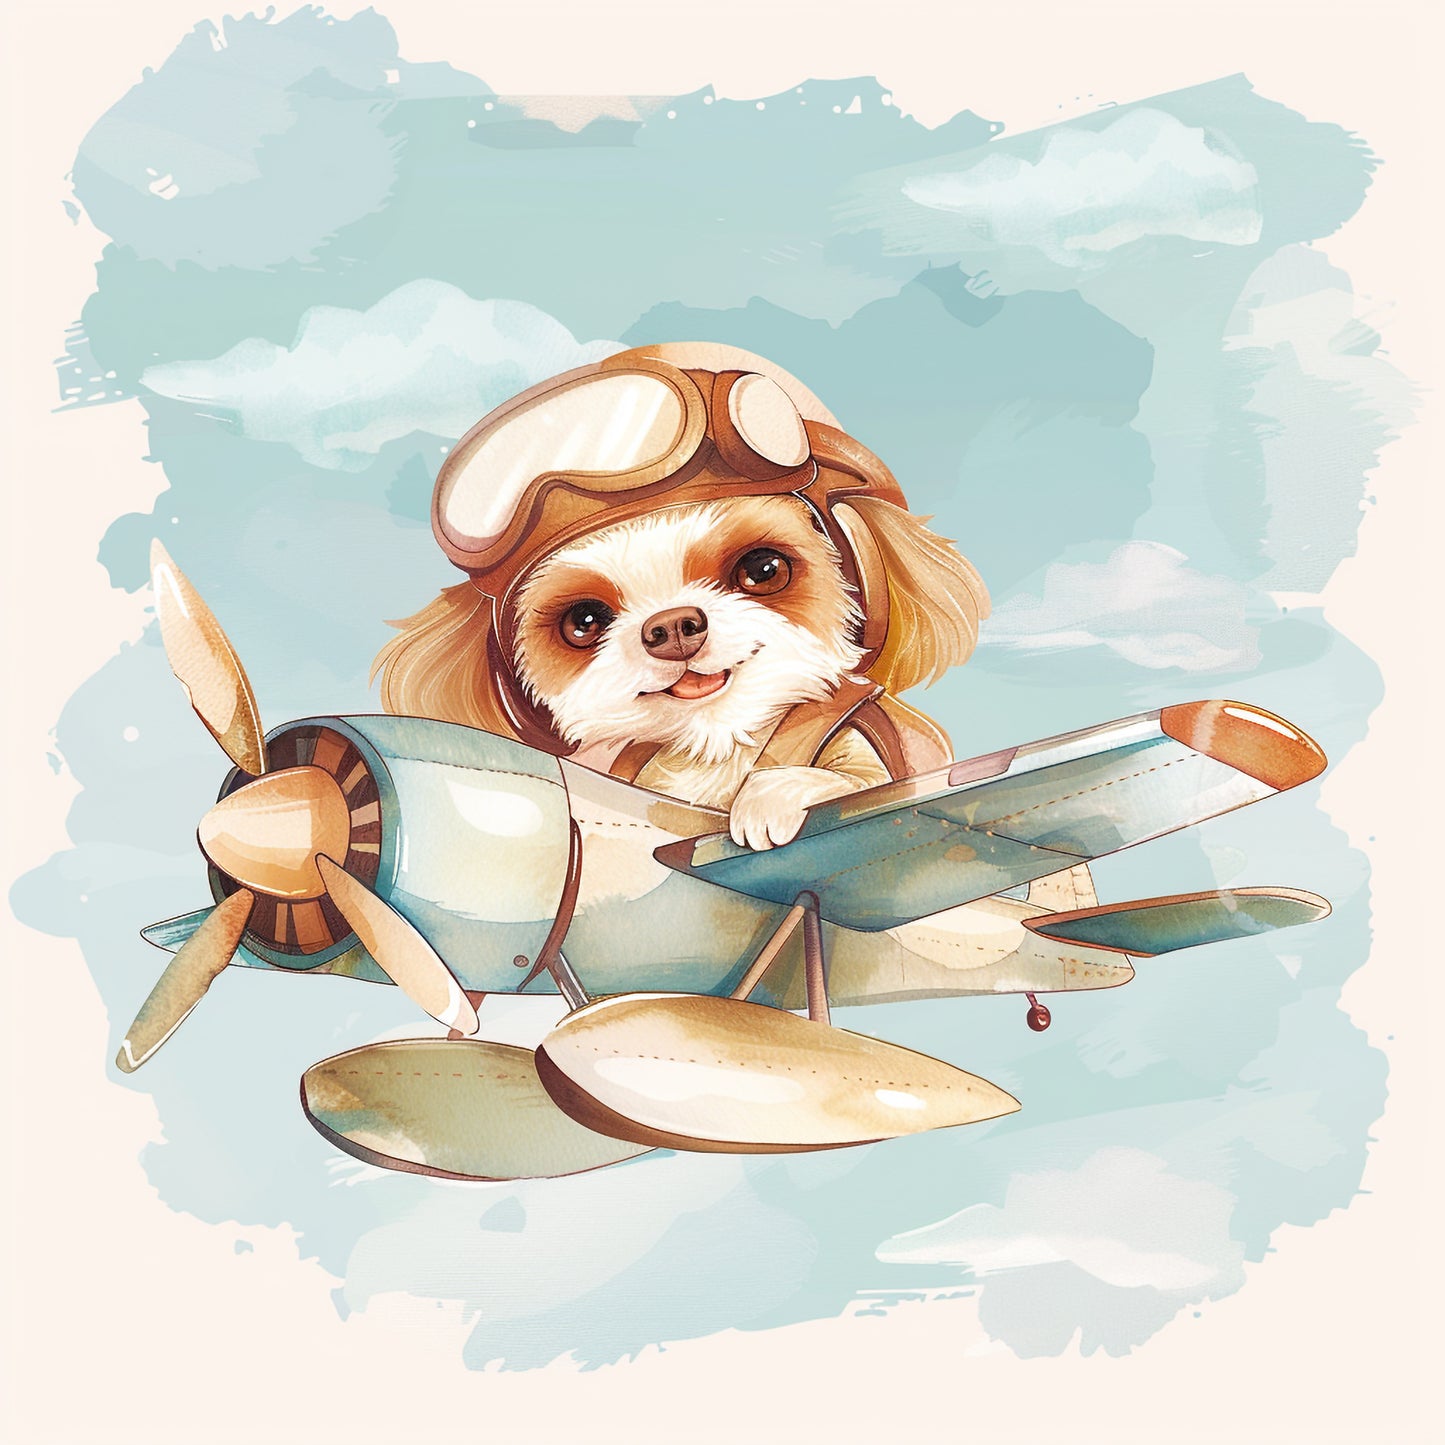 Adorable Dog Pilot in Vintage Aviator Gear with Plane